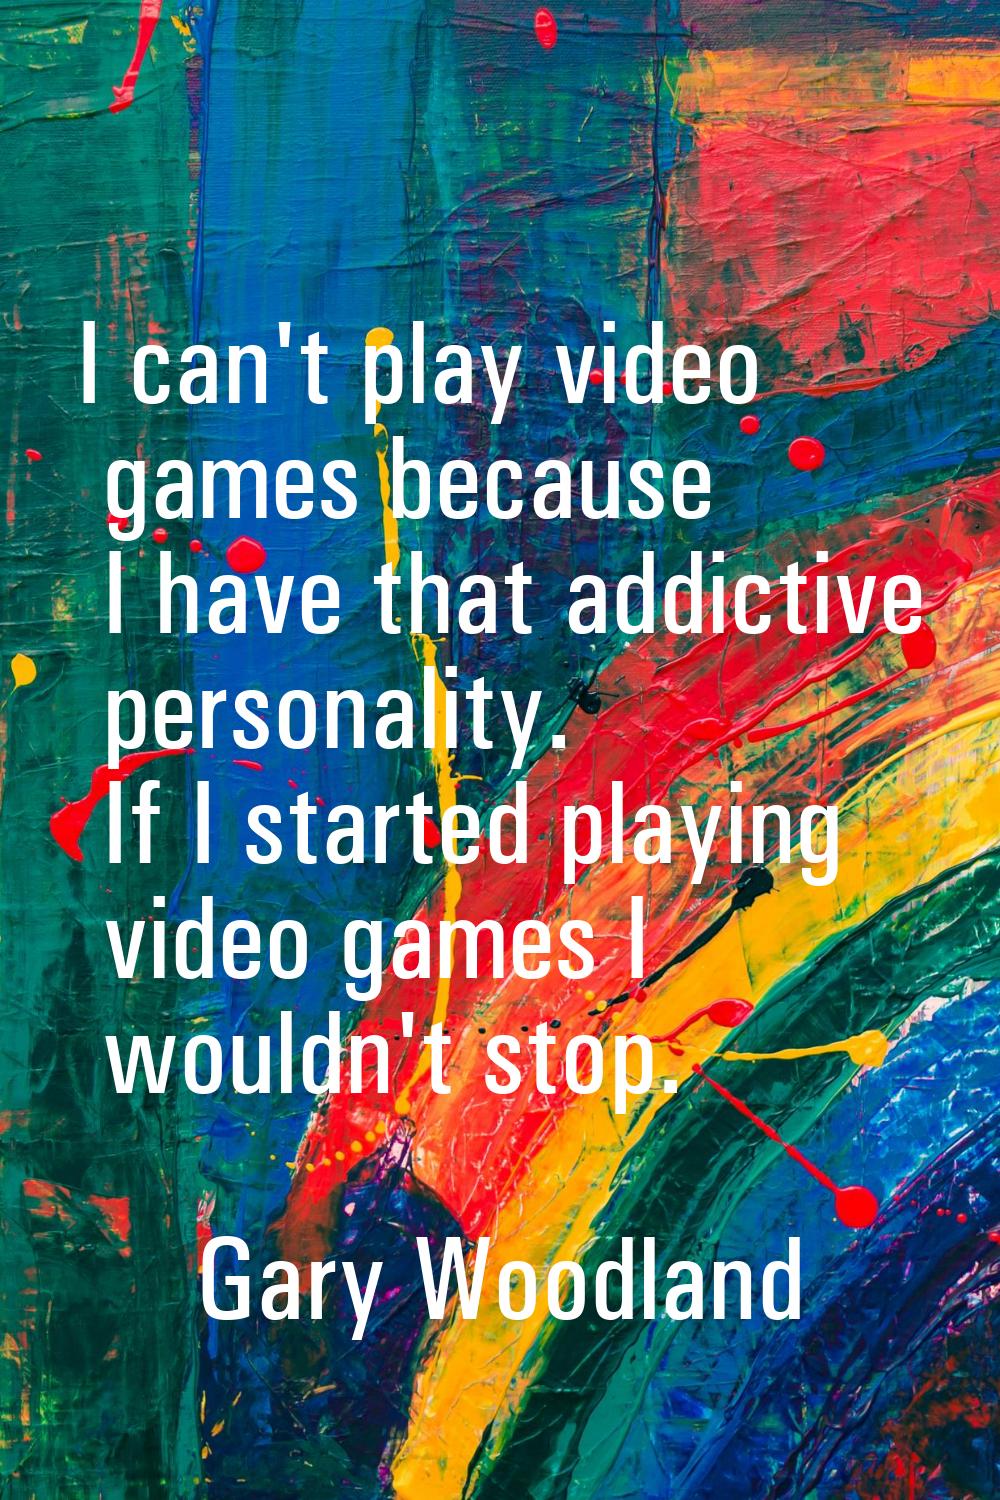 I can't play video games because I have that addictive personality. If I started playing video game